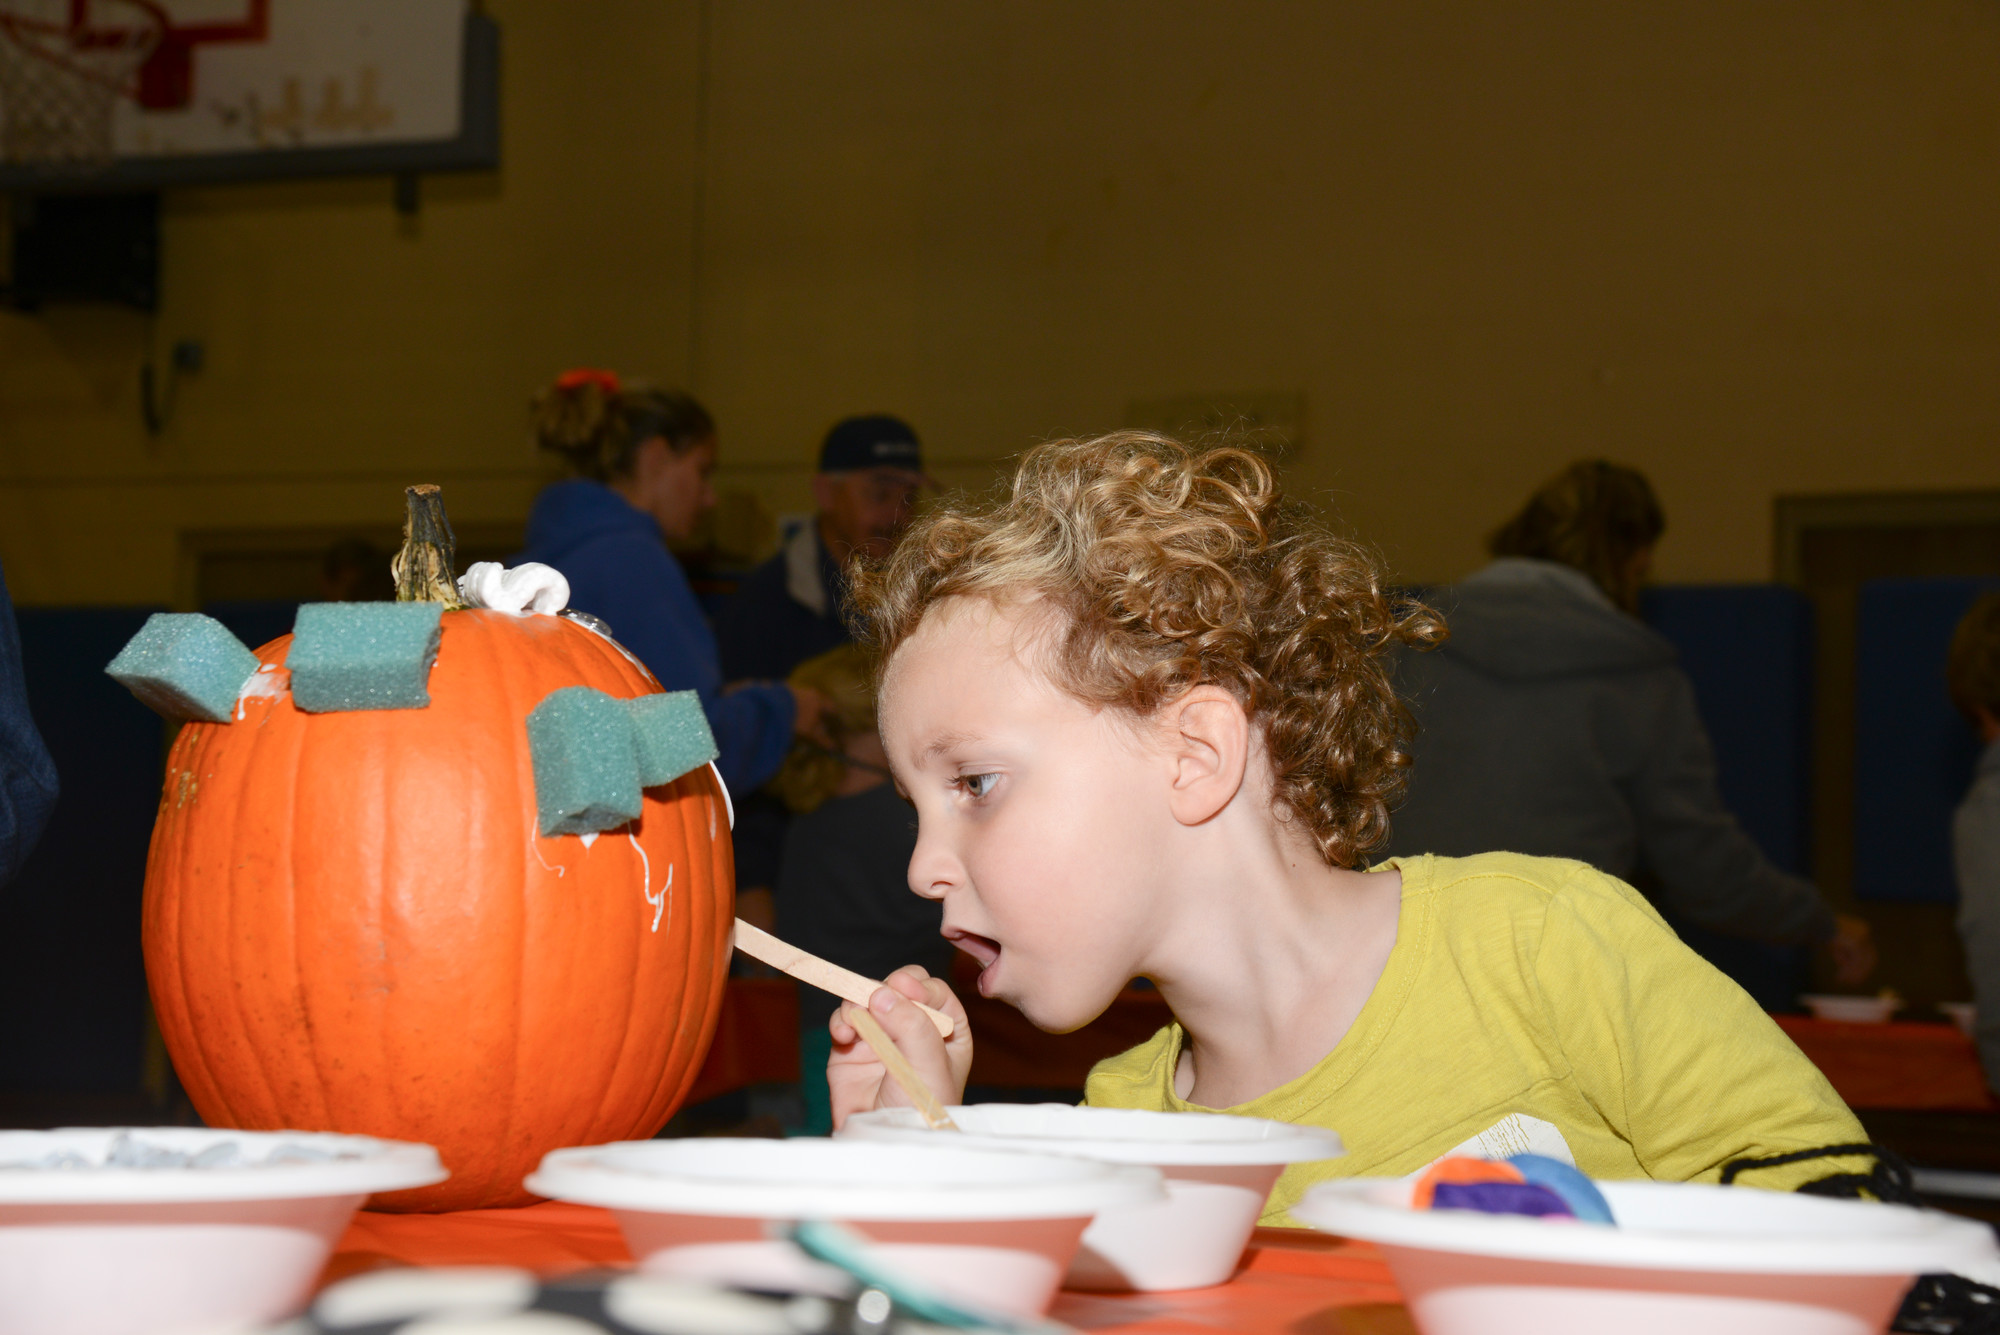 Wyatt Reiss, 3, kept his eyes on his artwork as Oceanside      celebrated October with an event sponsored by the Kiwanis Club and the Department of Community Activities at School No. 6 last Wednesday.